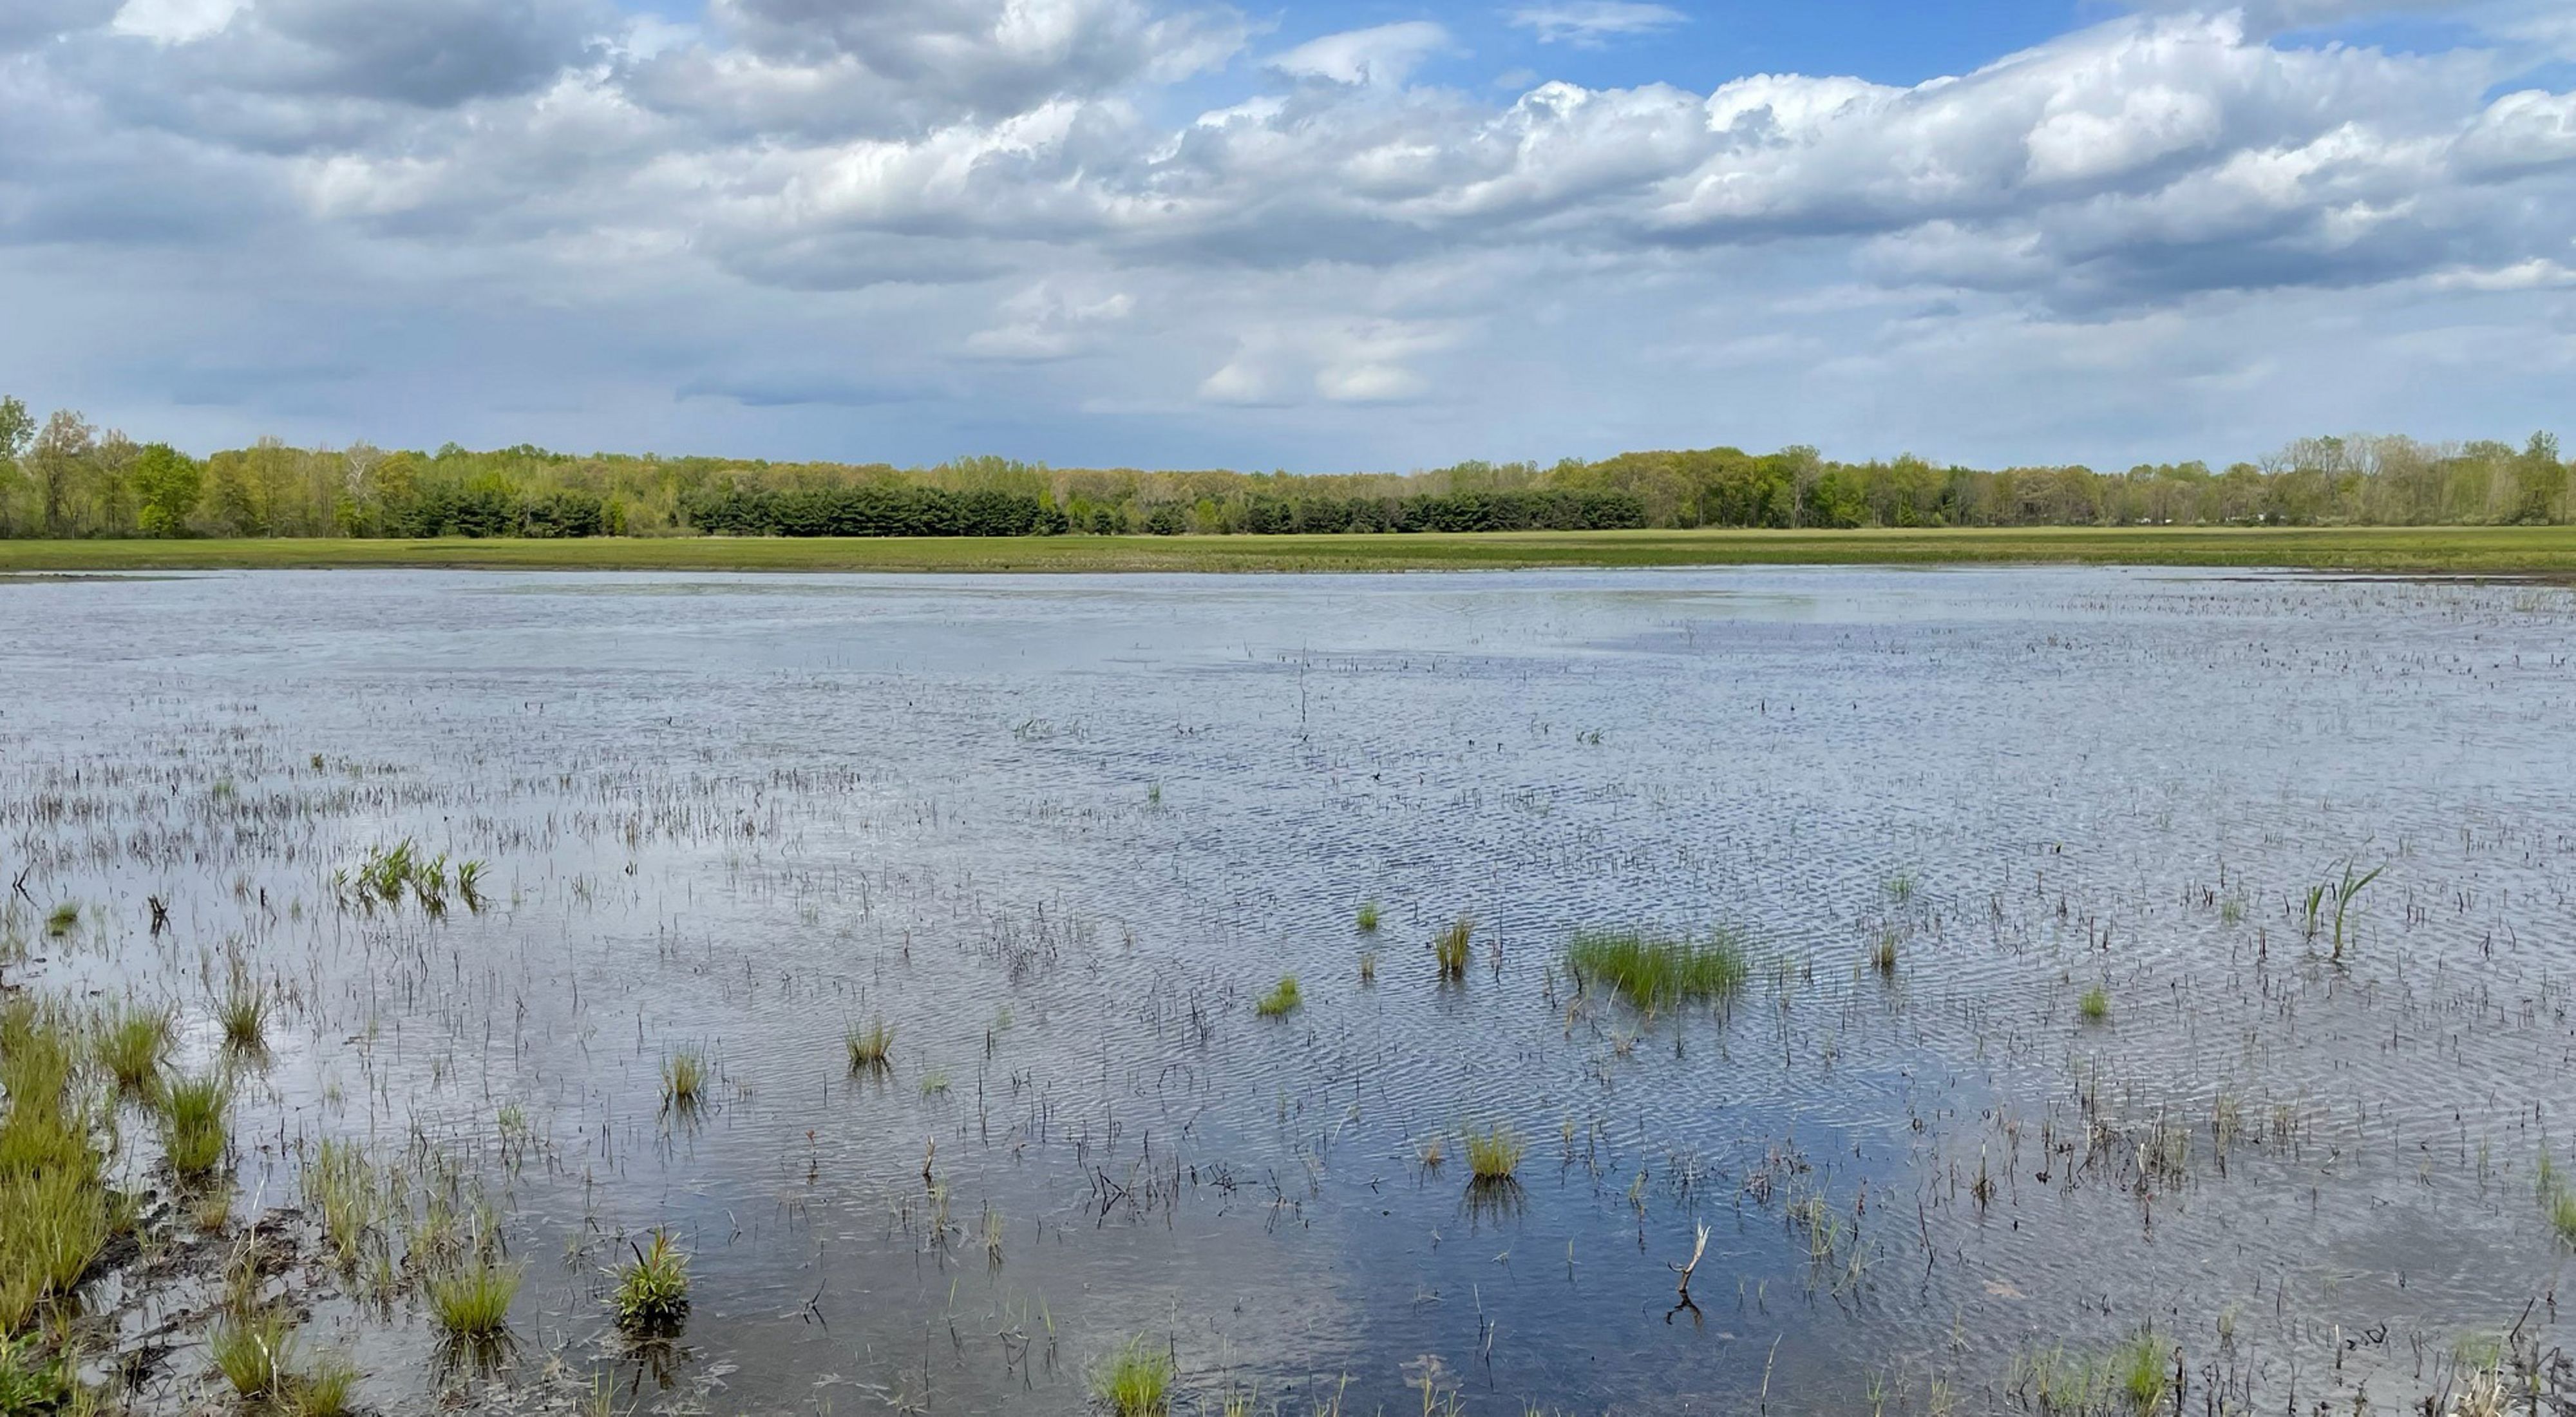 Landscape view of large wetland at Sandhill Crane Wetlands, with a body of water in the foreground and a forest of trees surrounding the wetland in the distance.